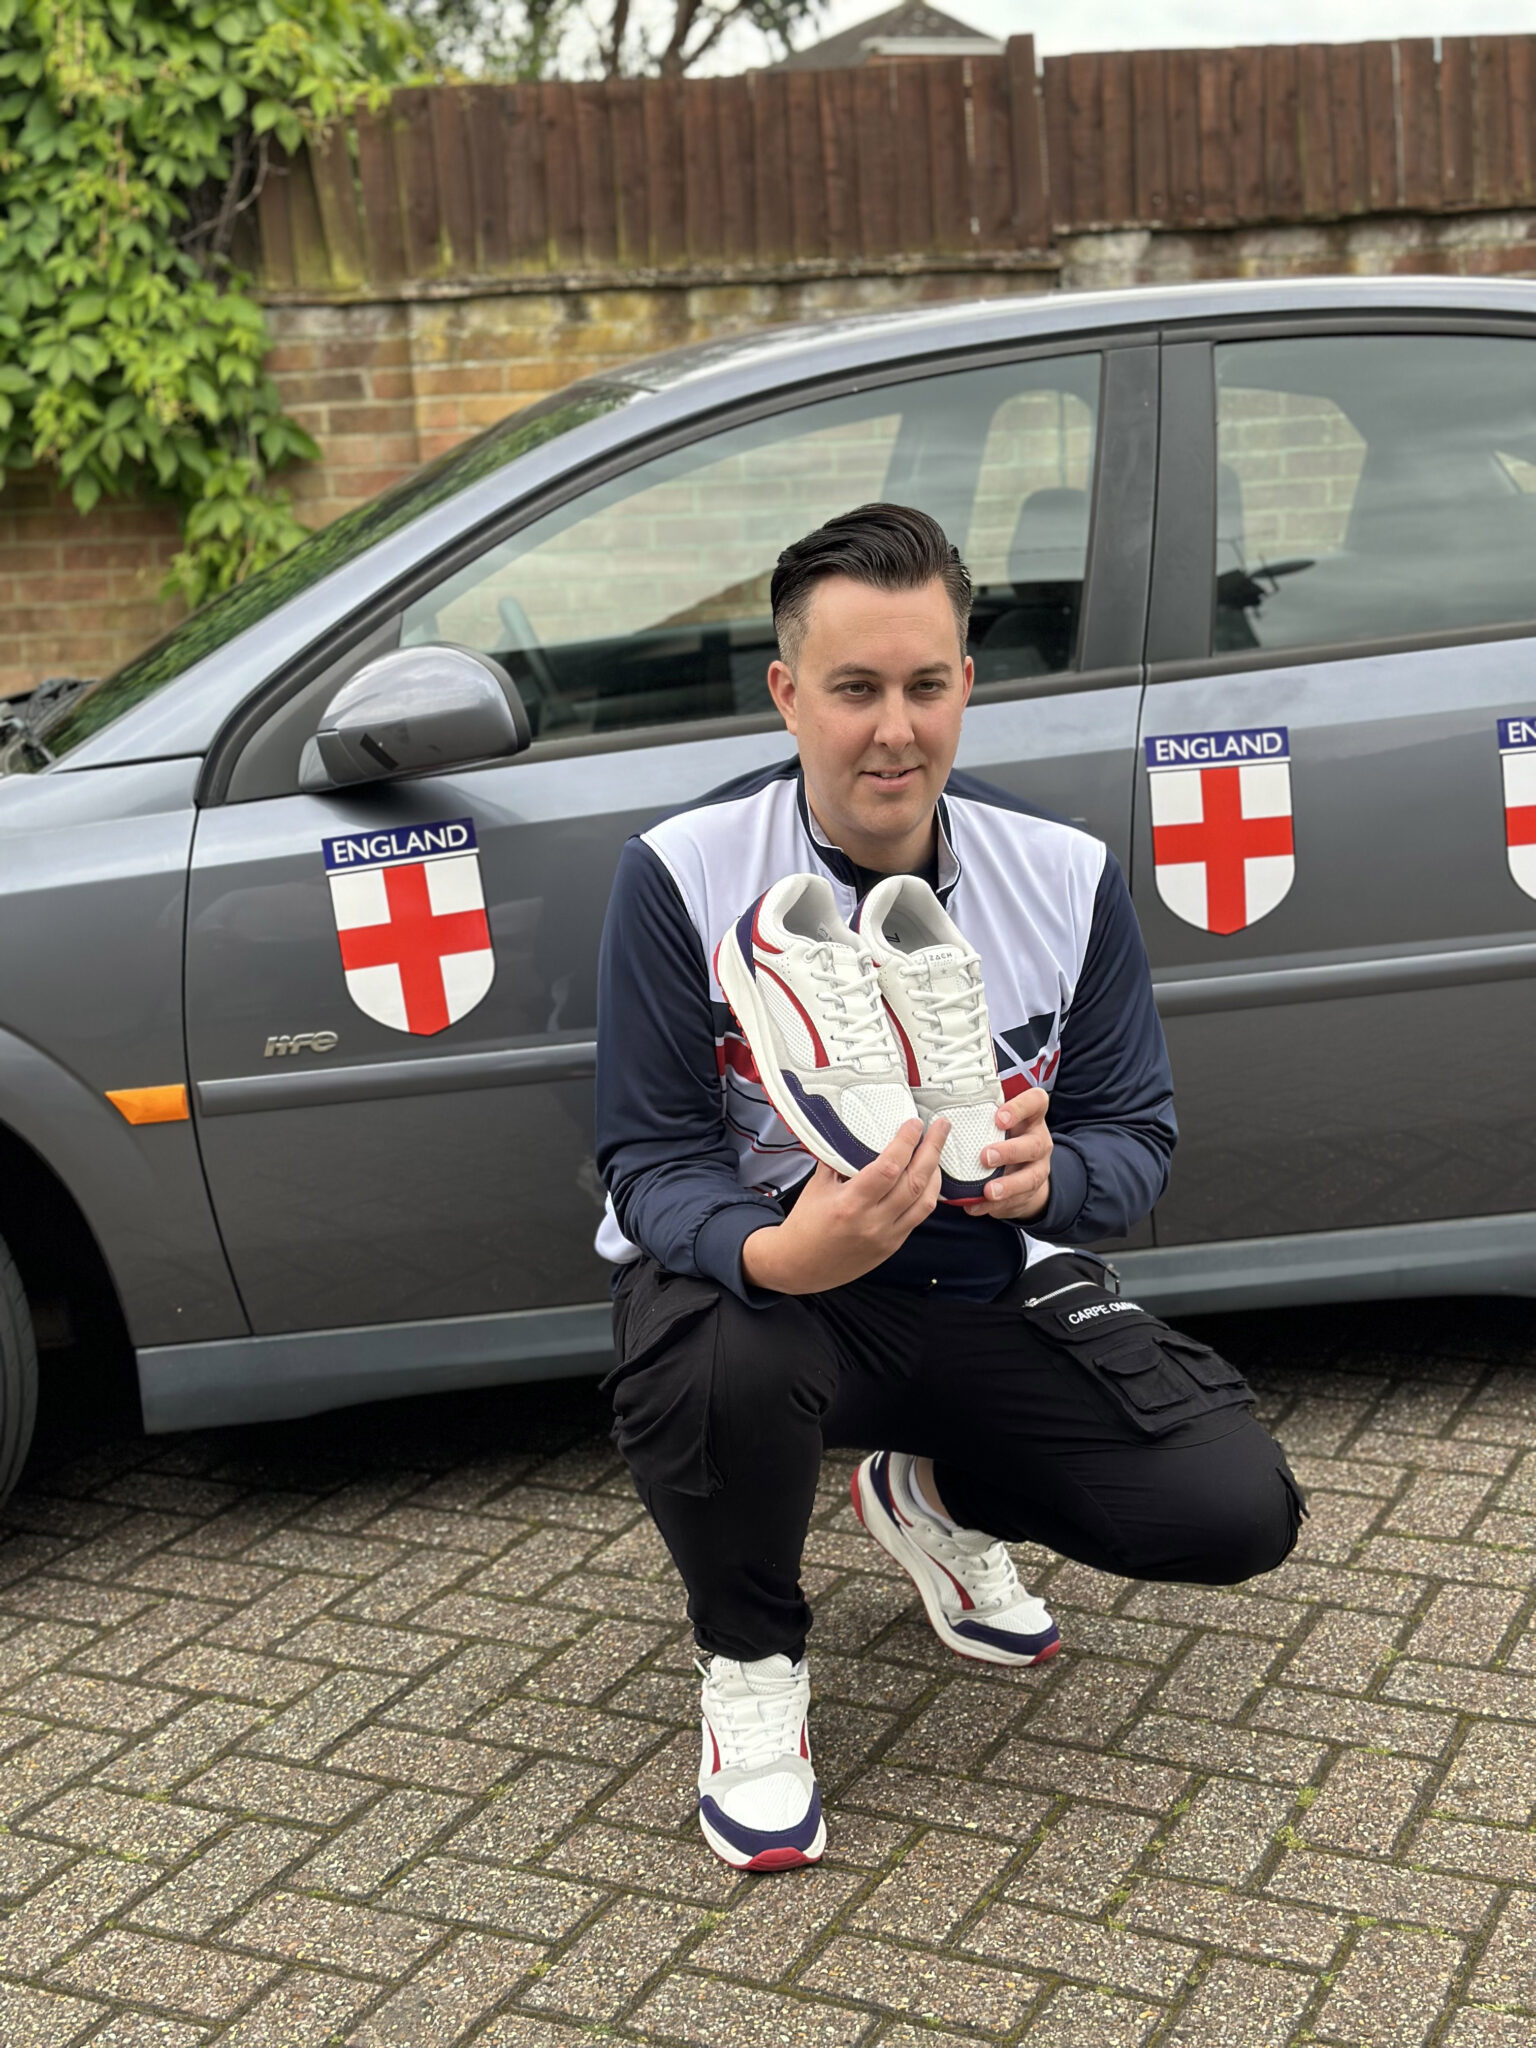 England fans Robbie Thompson and Dan McGladdery drive 2,500 miles in a £650 Vauxhall Vectra to support the Three Lions at Euro 2024. Follow their adventurous journey and insights.